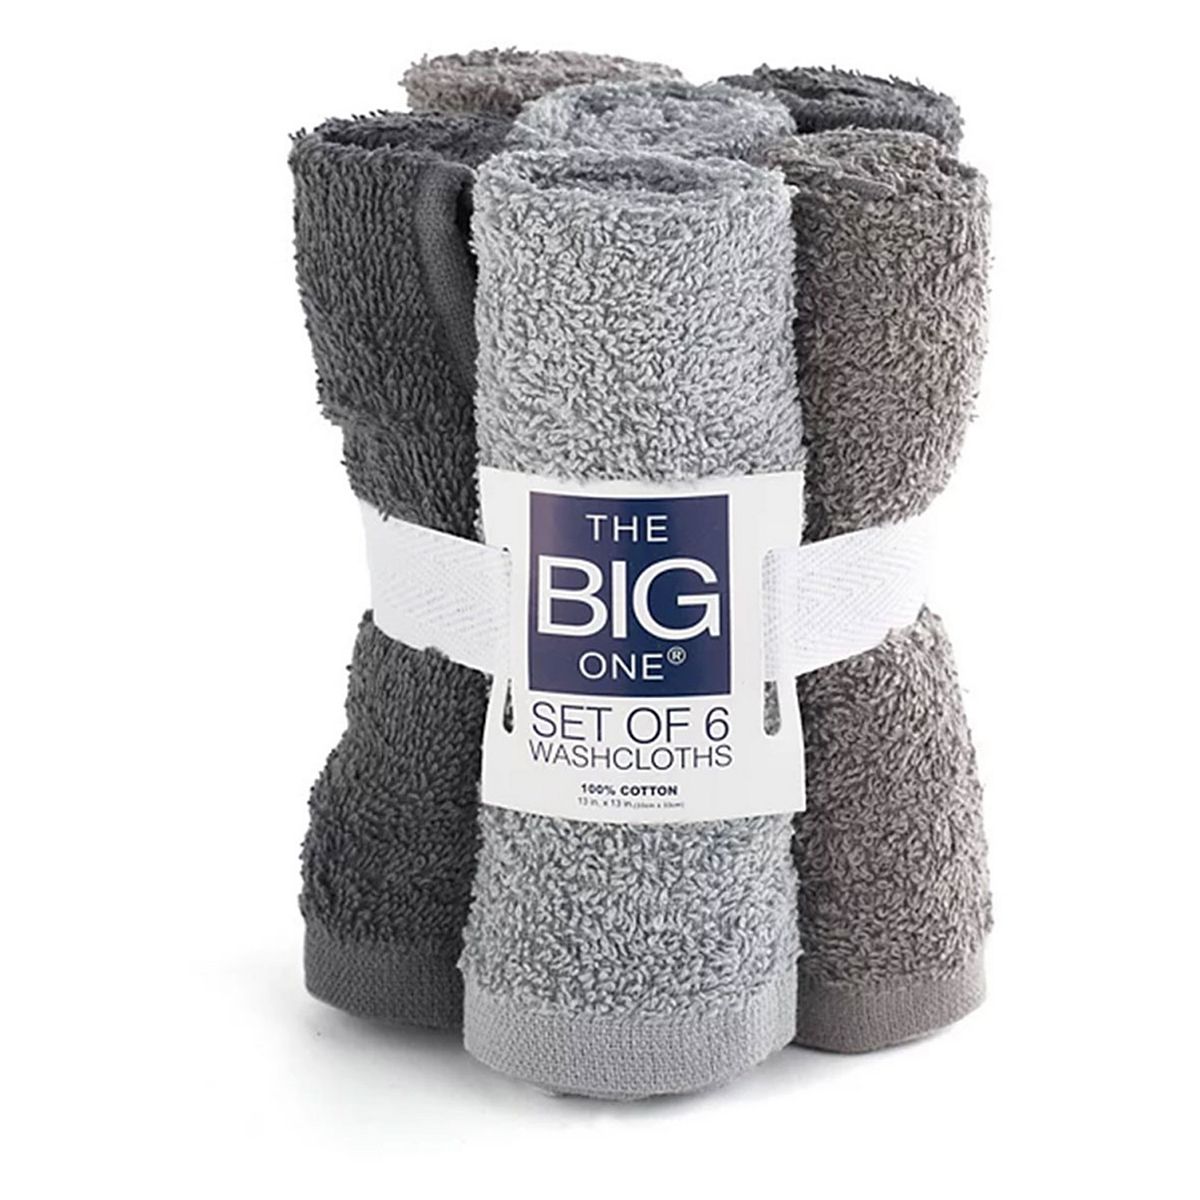 The Big One Towels & Pillows for $2.99